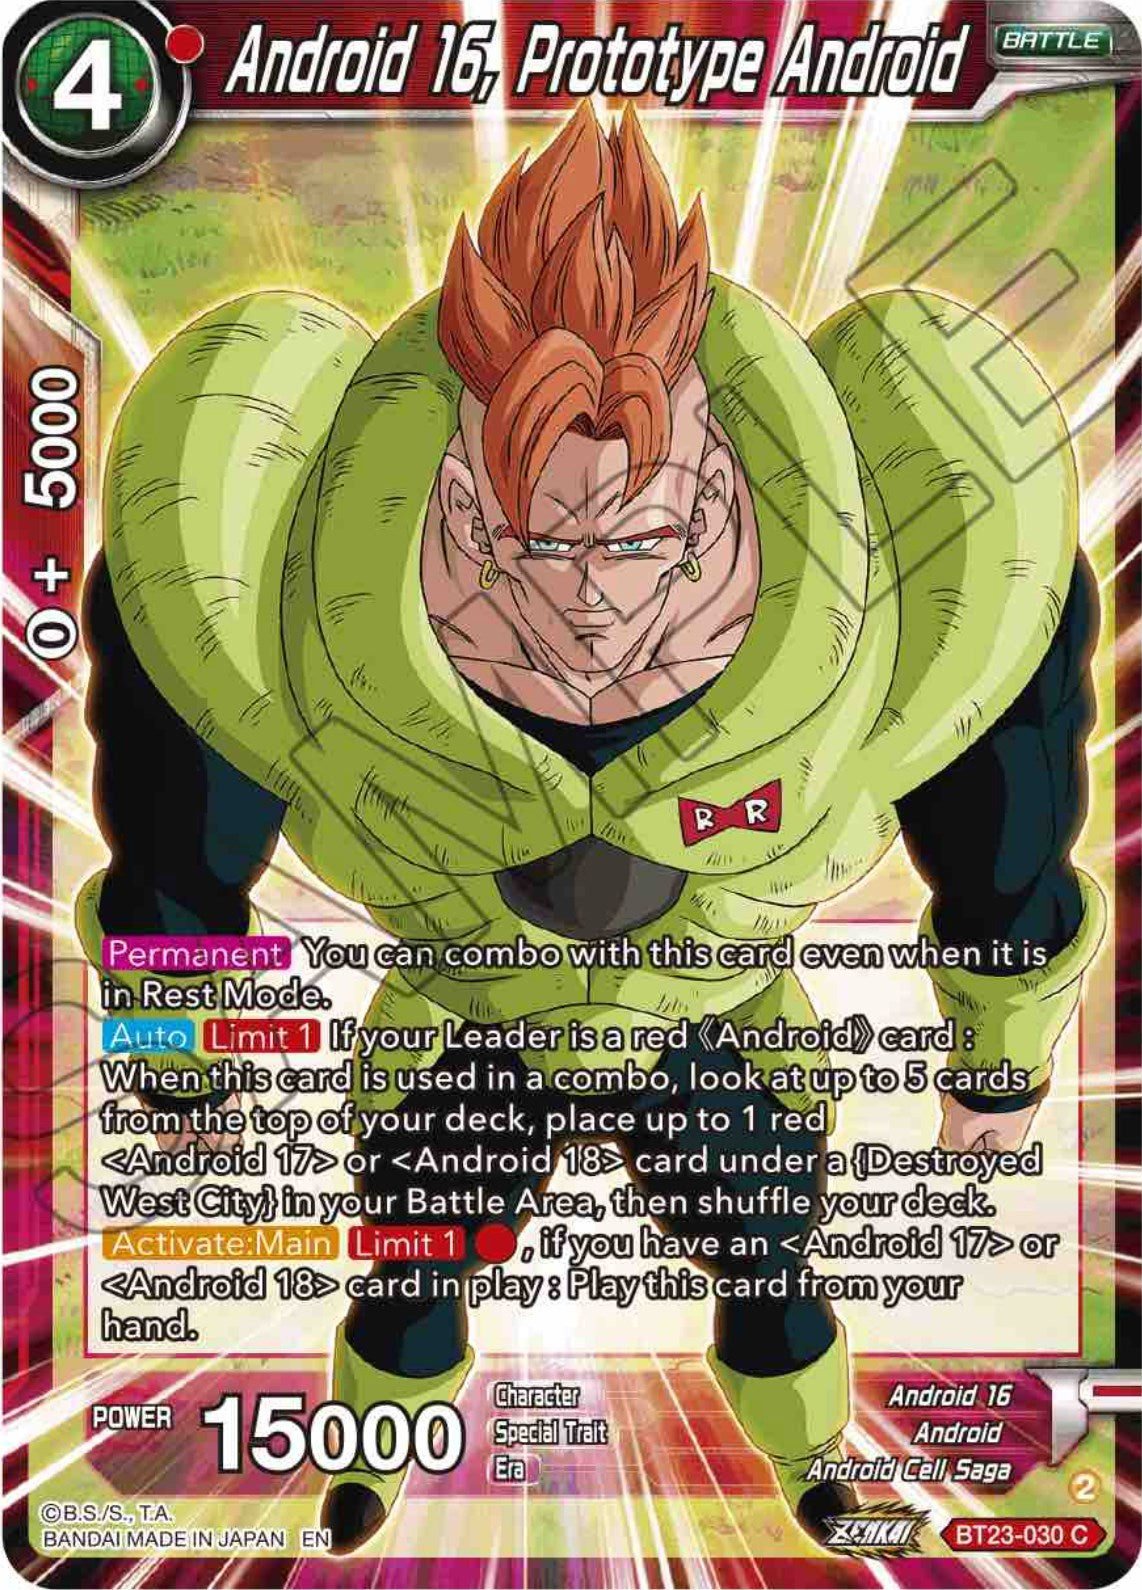 Android 16, Prototype Android (BT23-030) [Perfect Combination] | Black Swamp Games